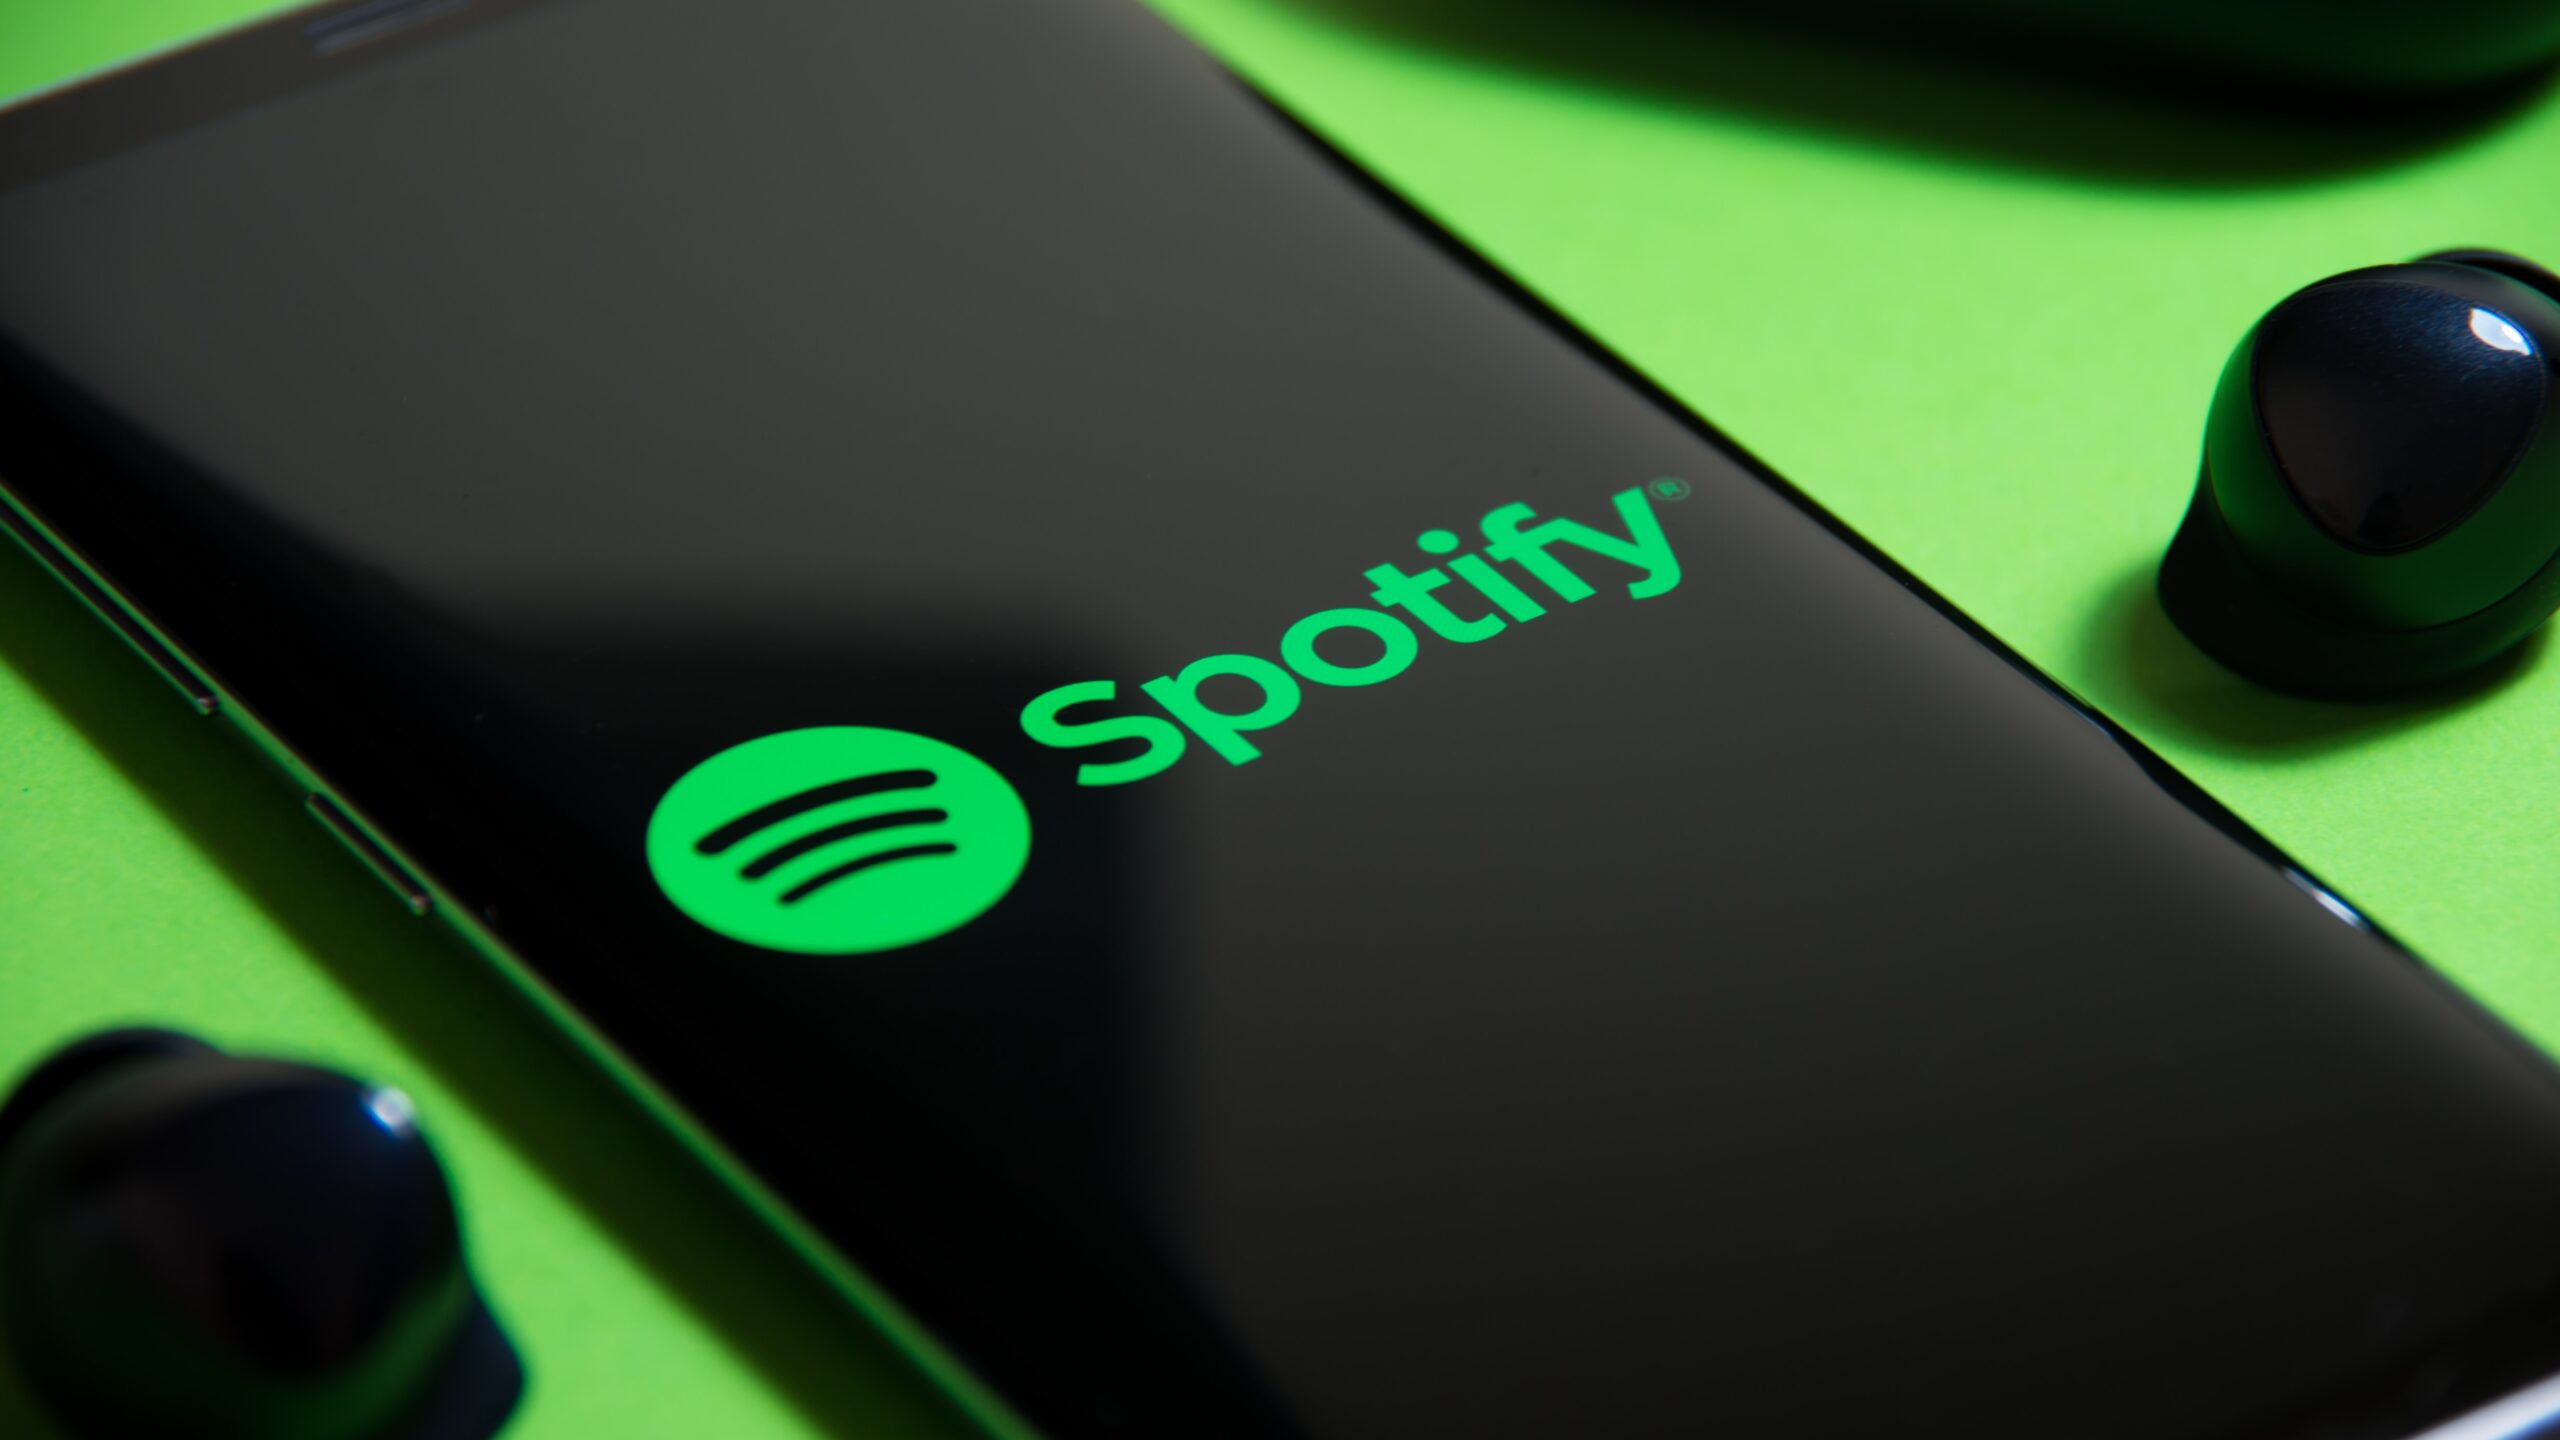 Spotify Premium jumps to $10.99, joining YouTube Music price hike